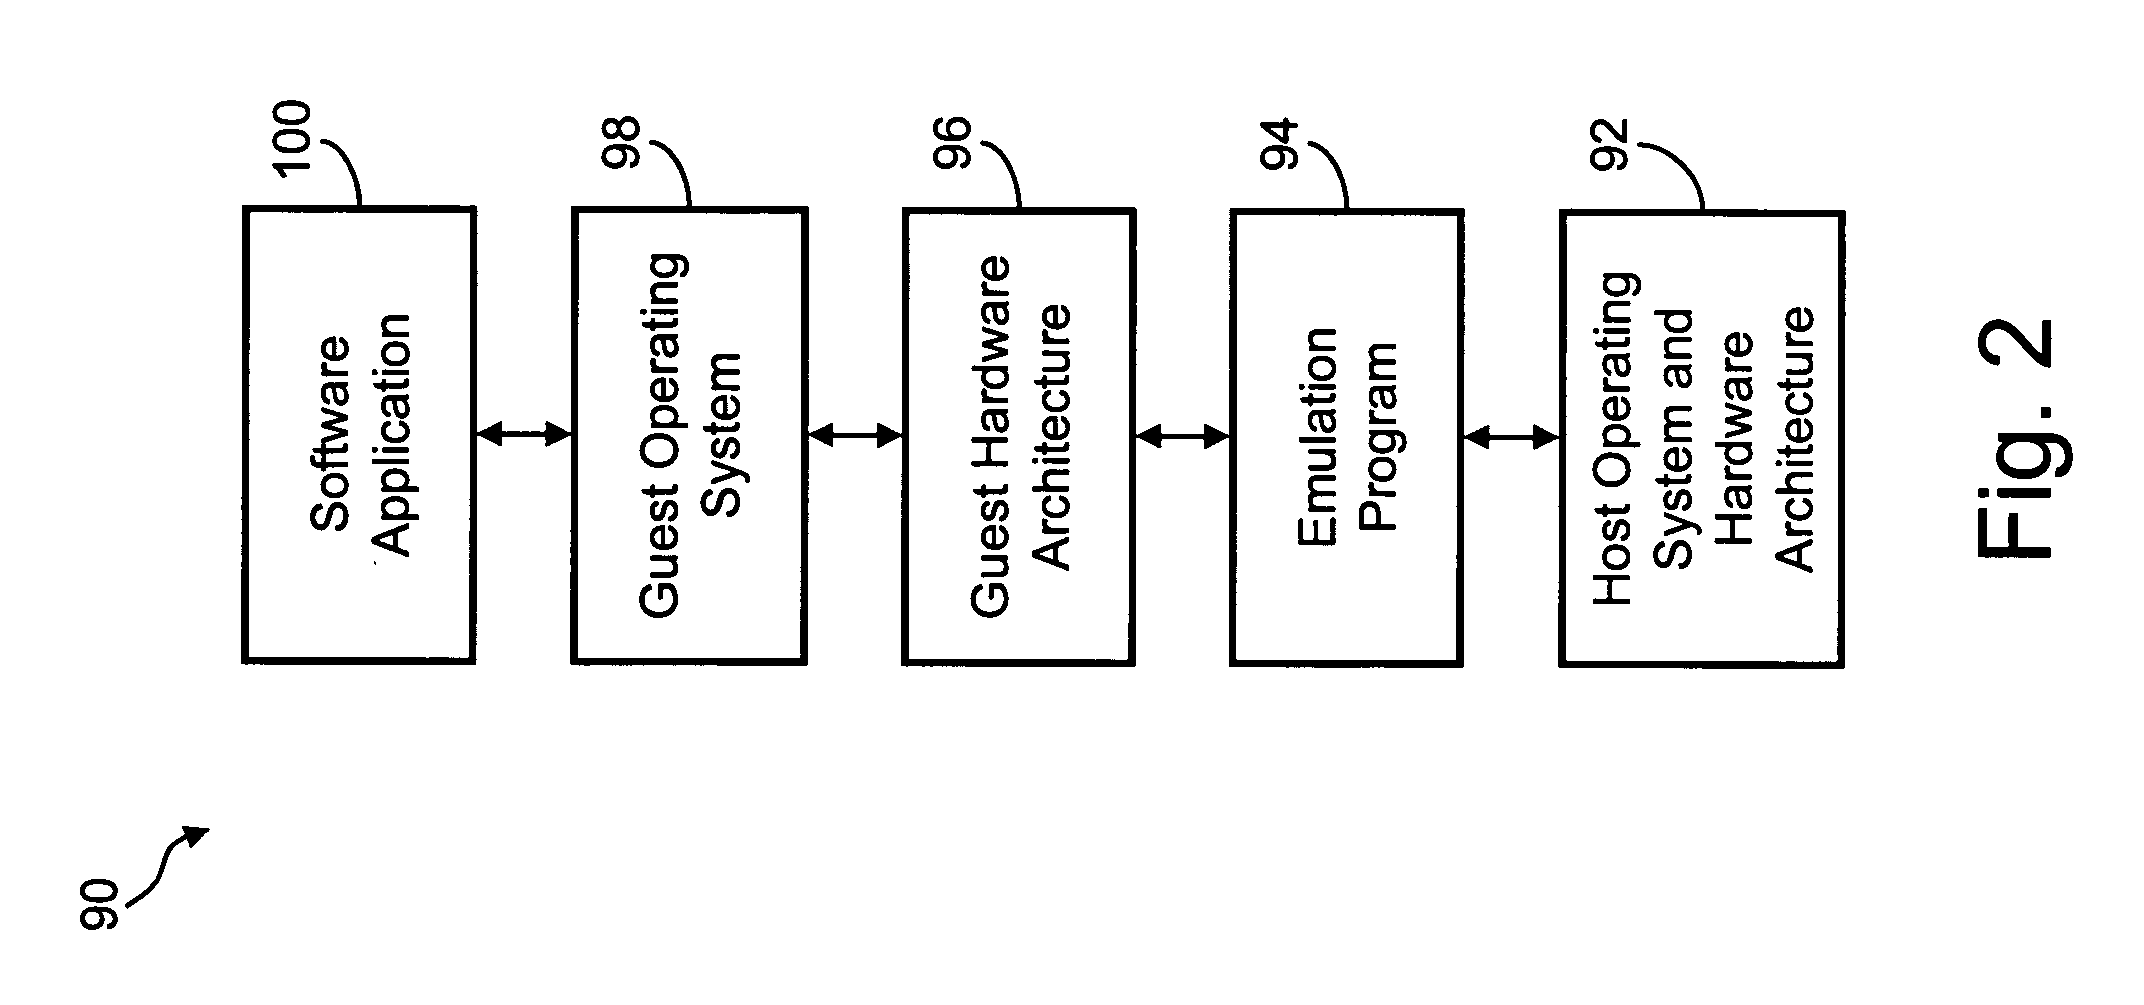 Systems and methods for stack-jumping between a virtual machine and a host environment